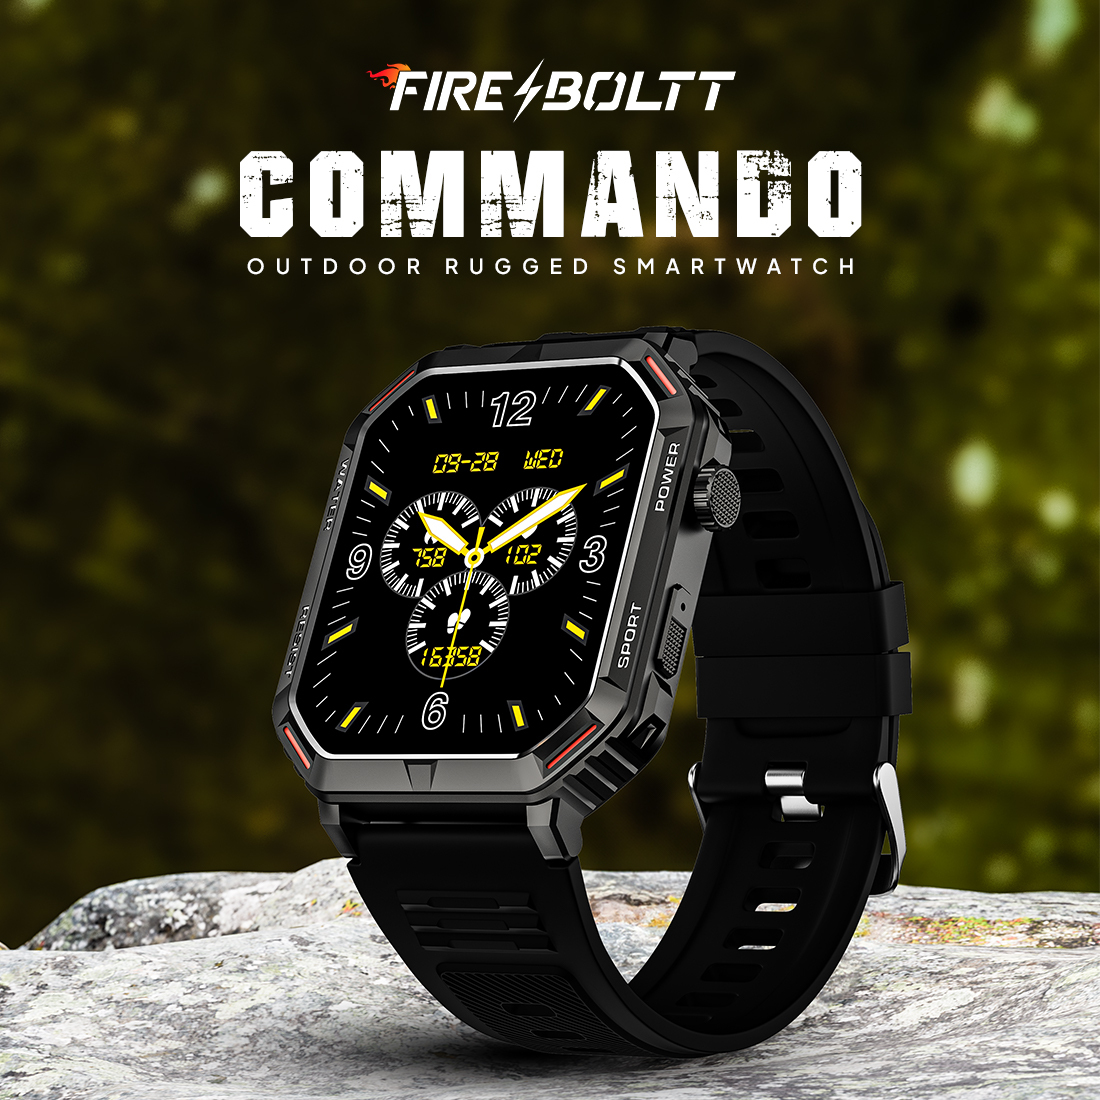 Fire-Boltt Commando with 1.95″ AMOLED display, metal body